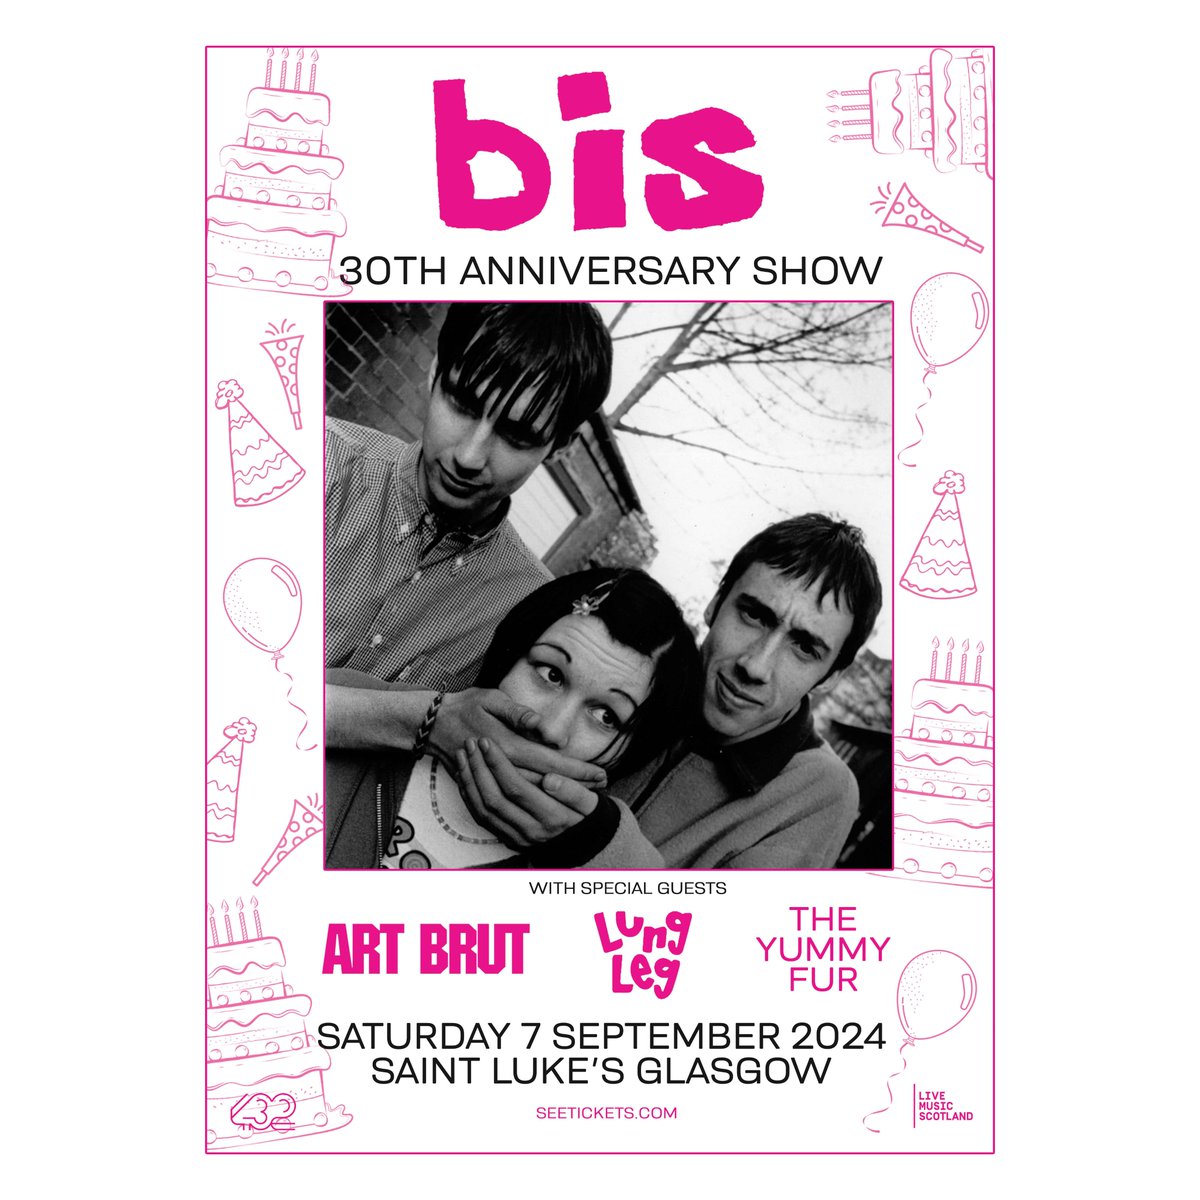 Now THIS is a line-up 👇It's 30 years of our strange band so this will be an exciting & emotional one in our hometown on Sat 7th Sep with Art Brut, Lungleg & The Yummy Fur. Come join the party 🥳 bit.ly/449hK1q